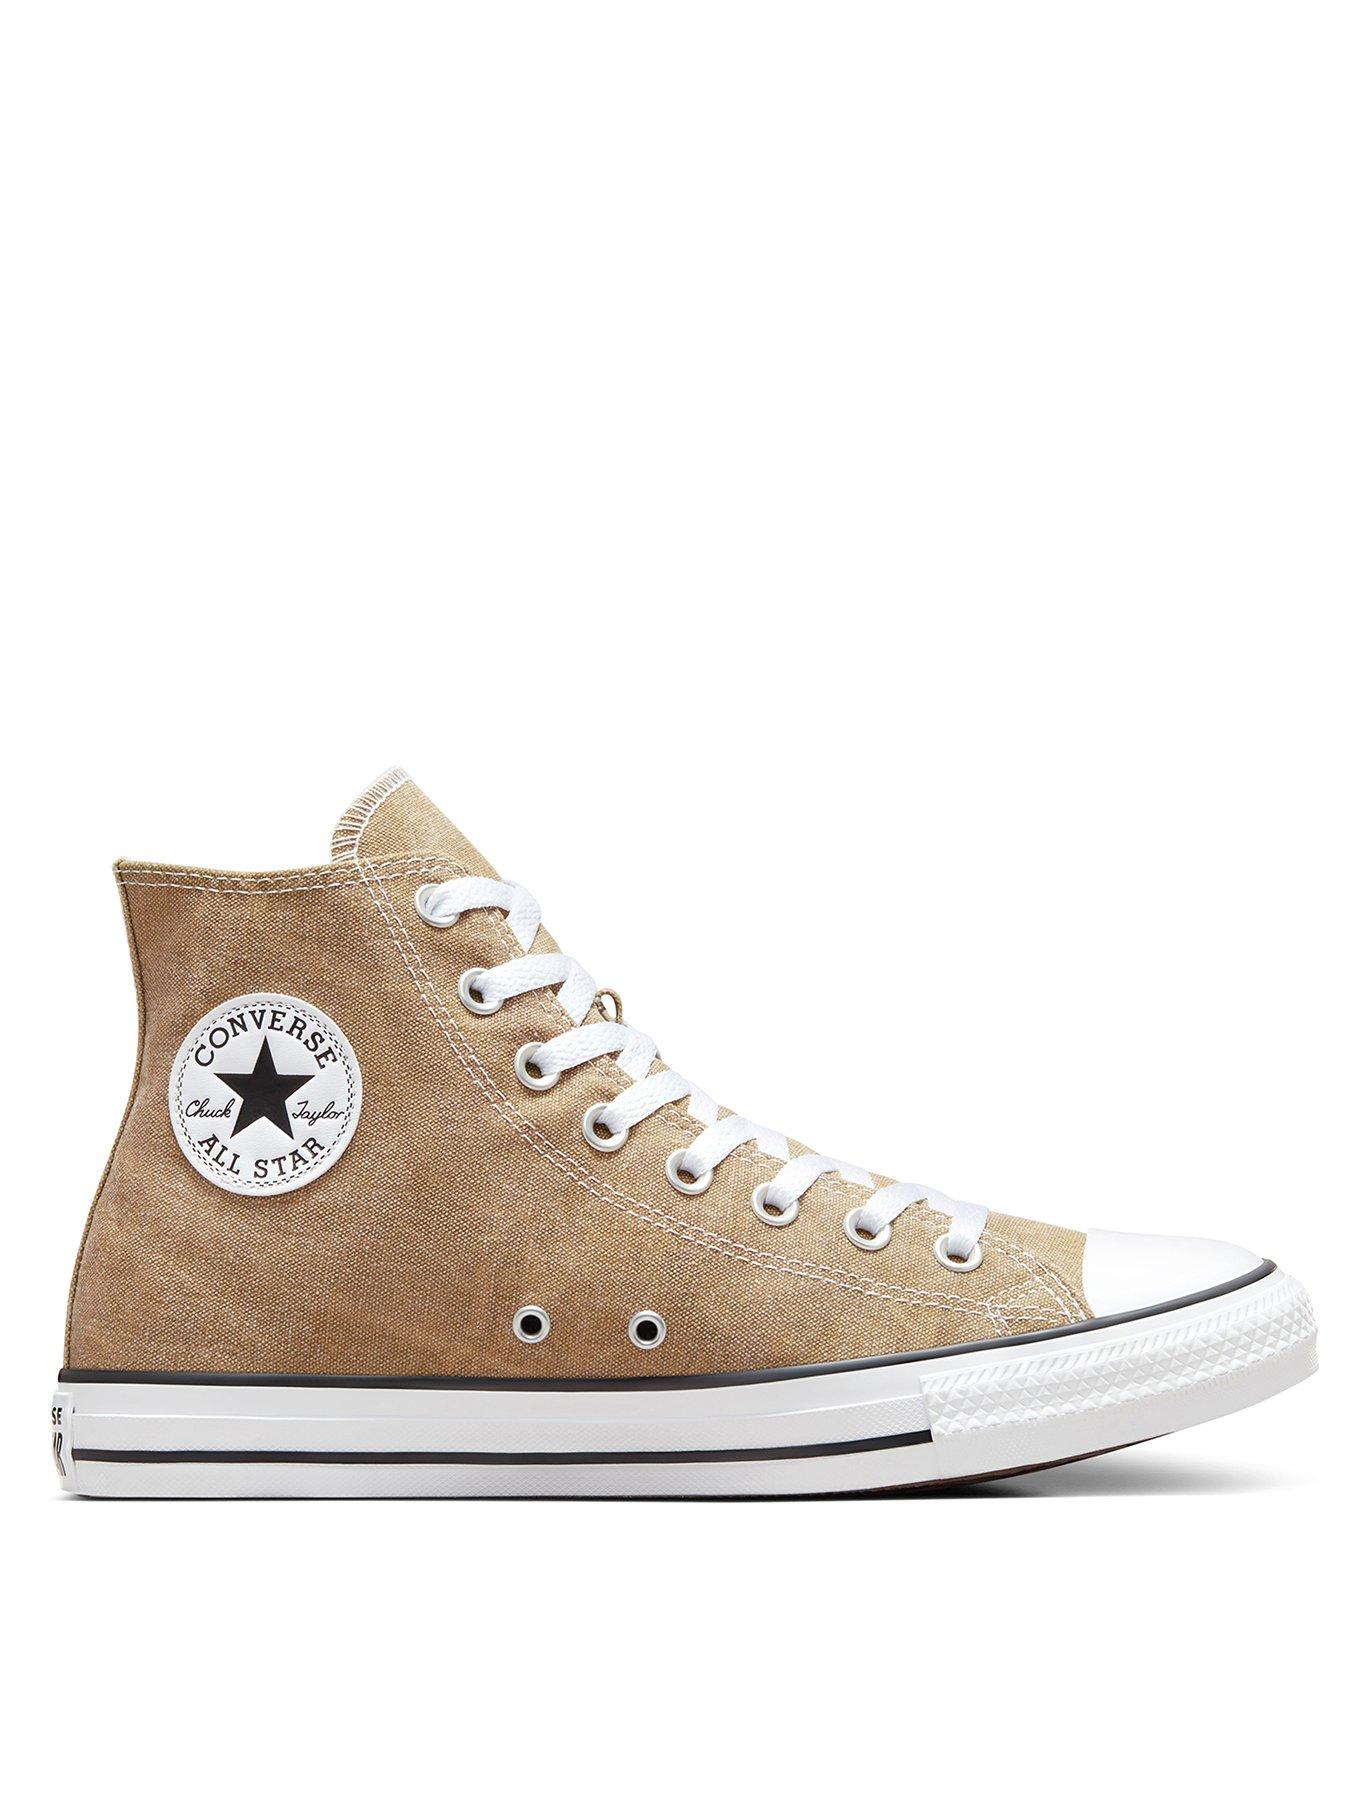 Converse Unisex Camp Daze High Tops Trainers - Brown, Brown, Size 7, Men